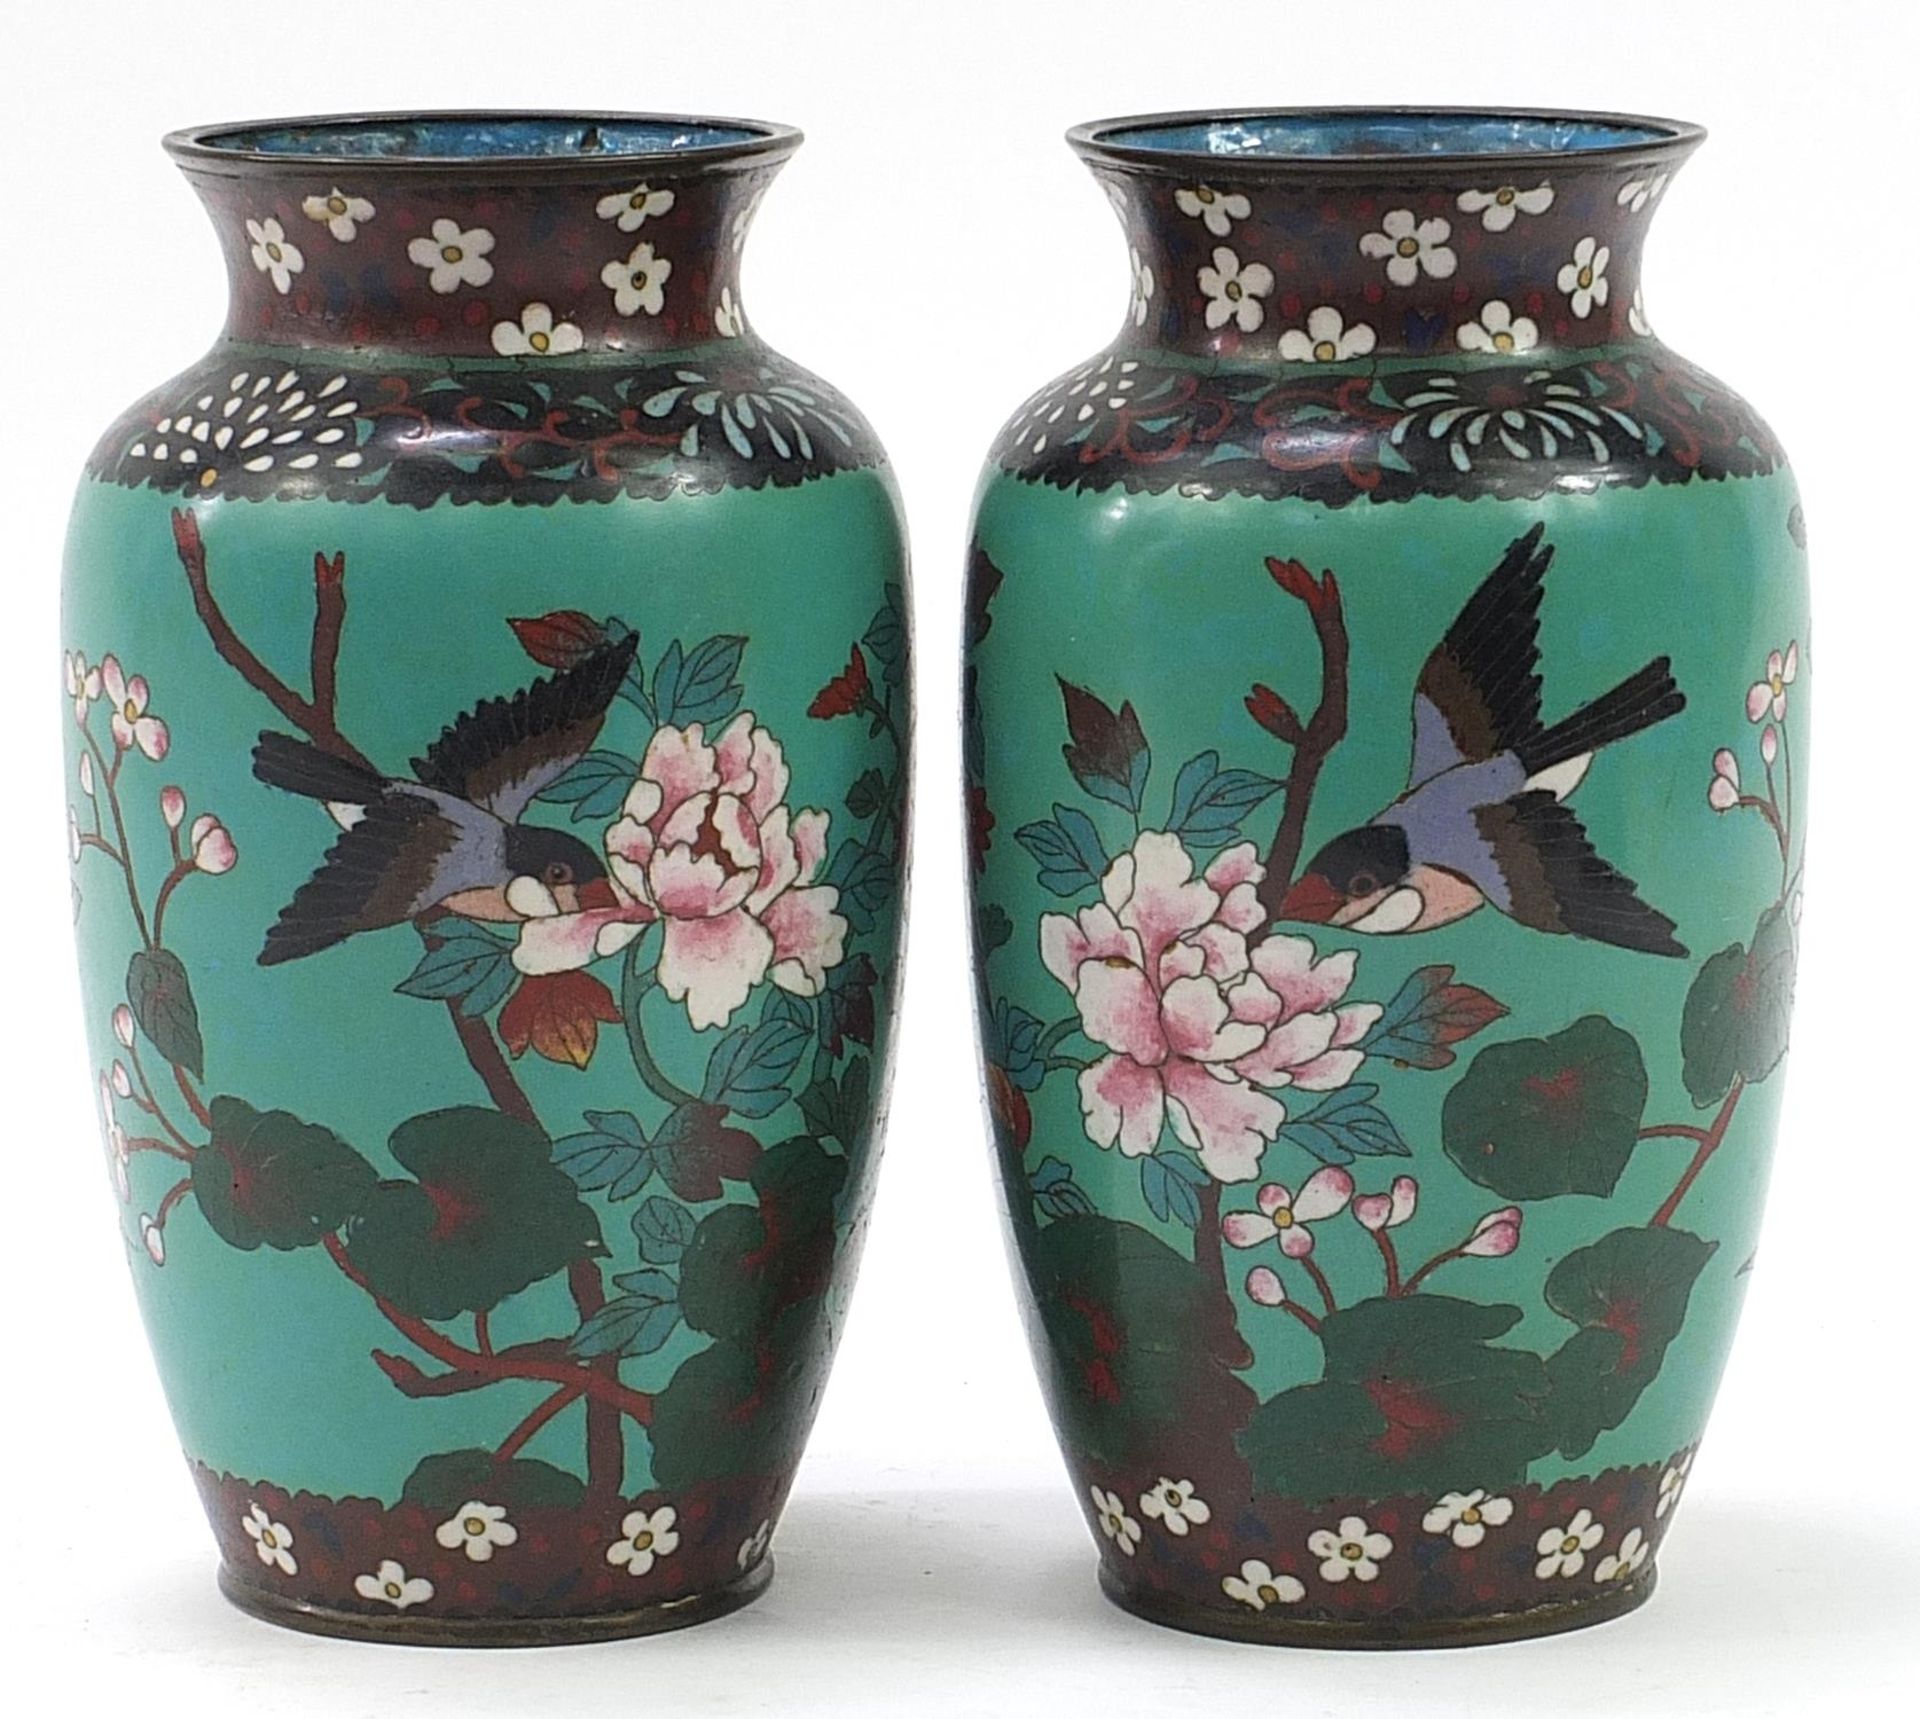 Pair of Japanese cloisonne vases enamelled with birds amongst flowers, each 25cm high - Image 2 of 3